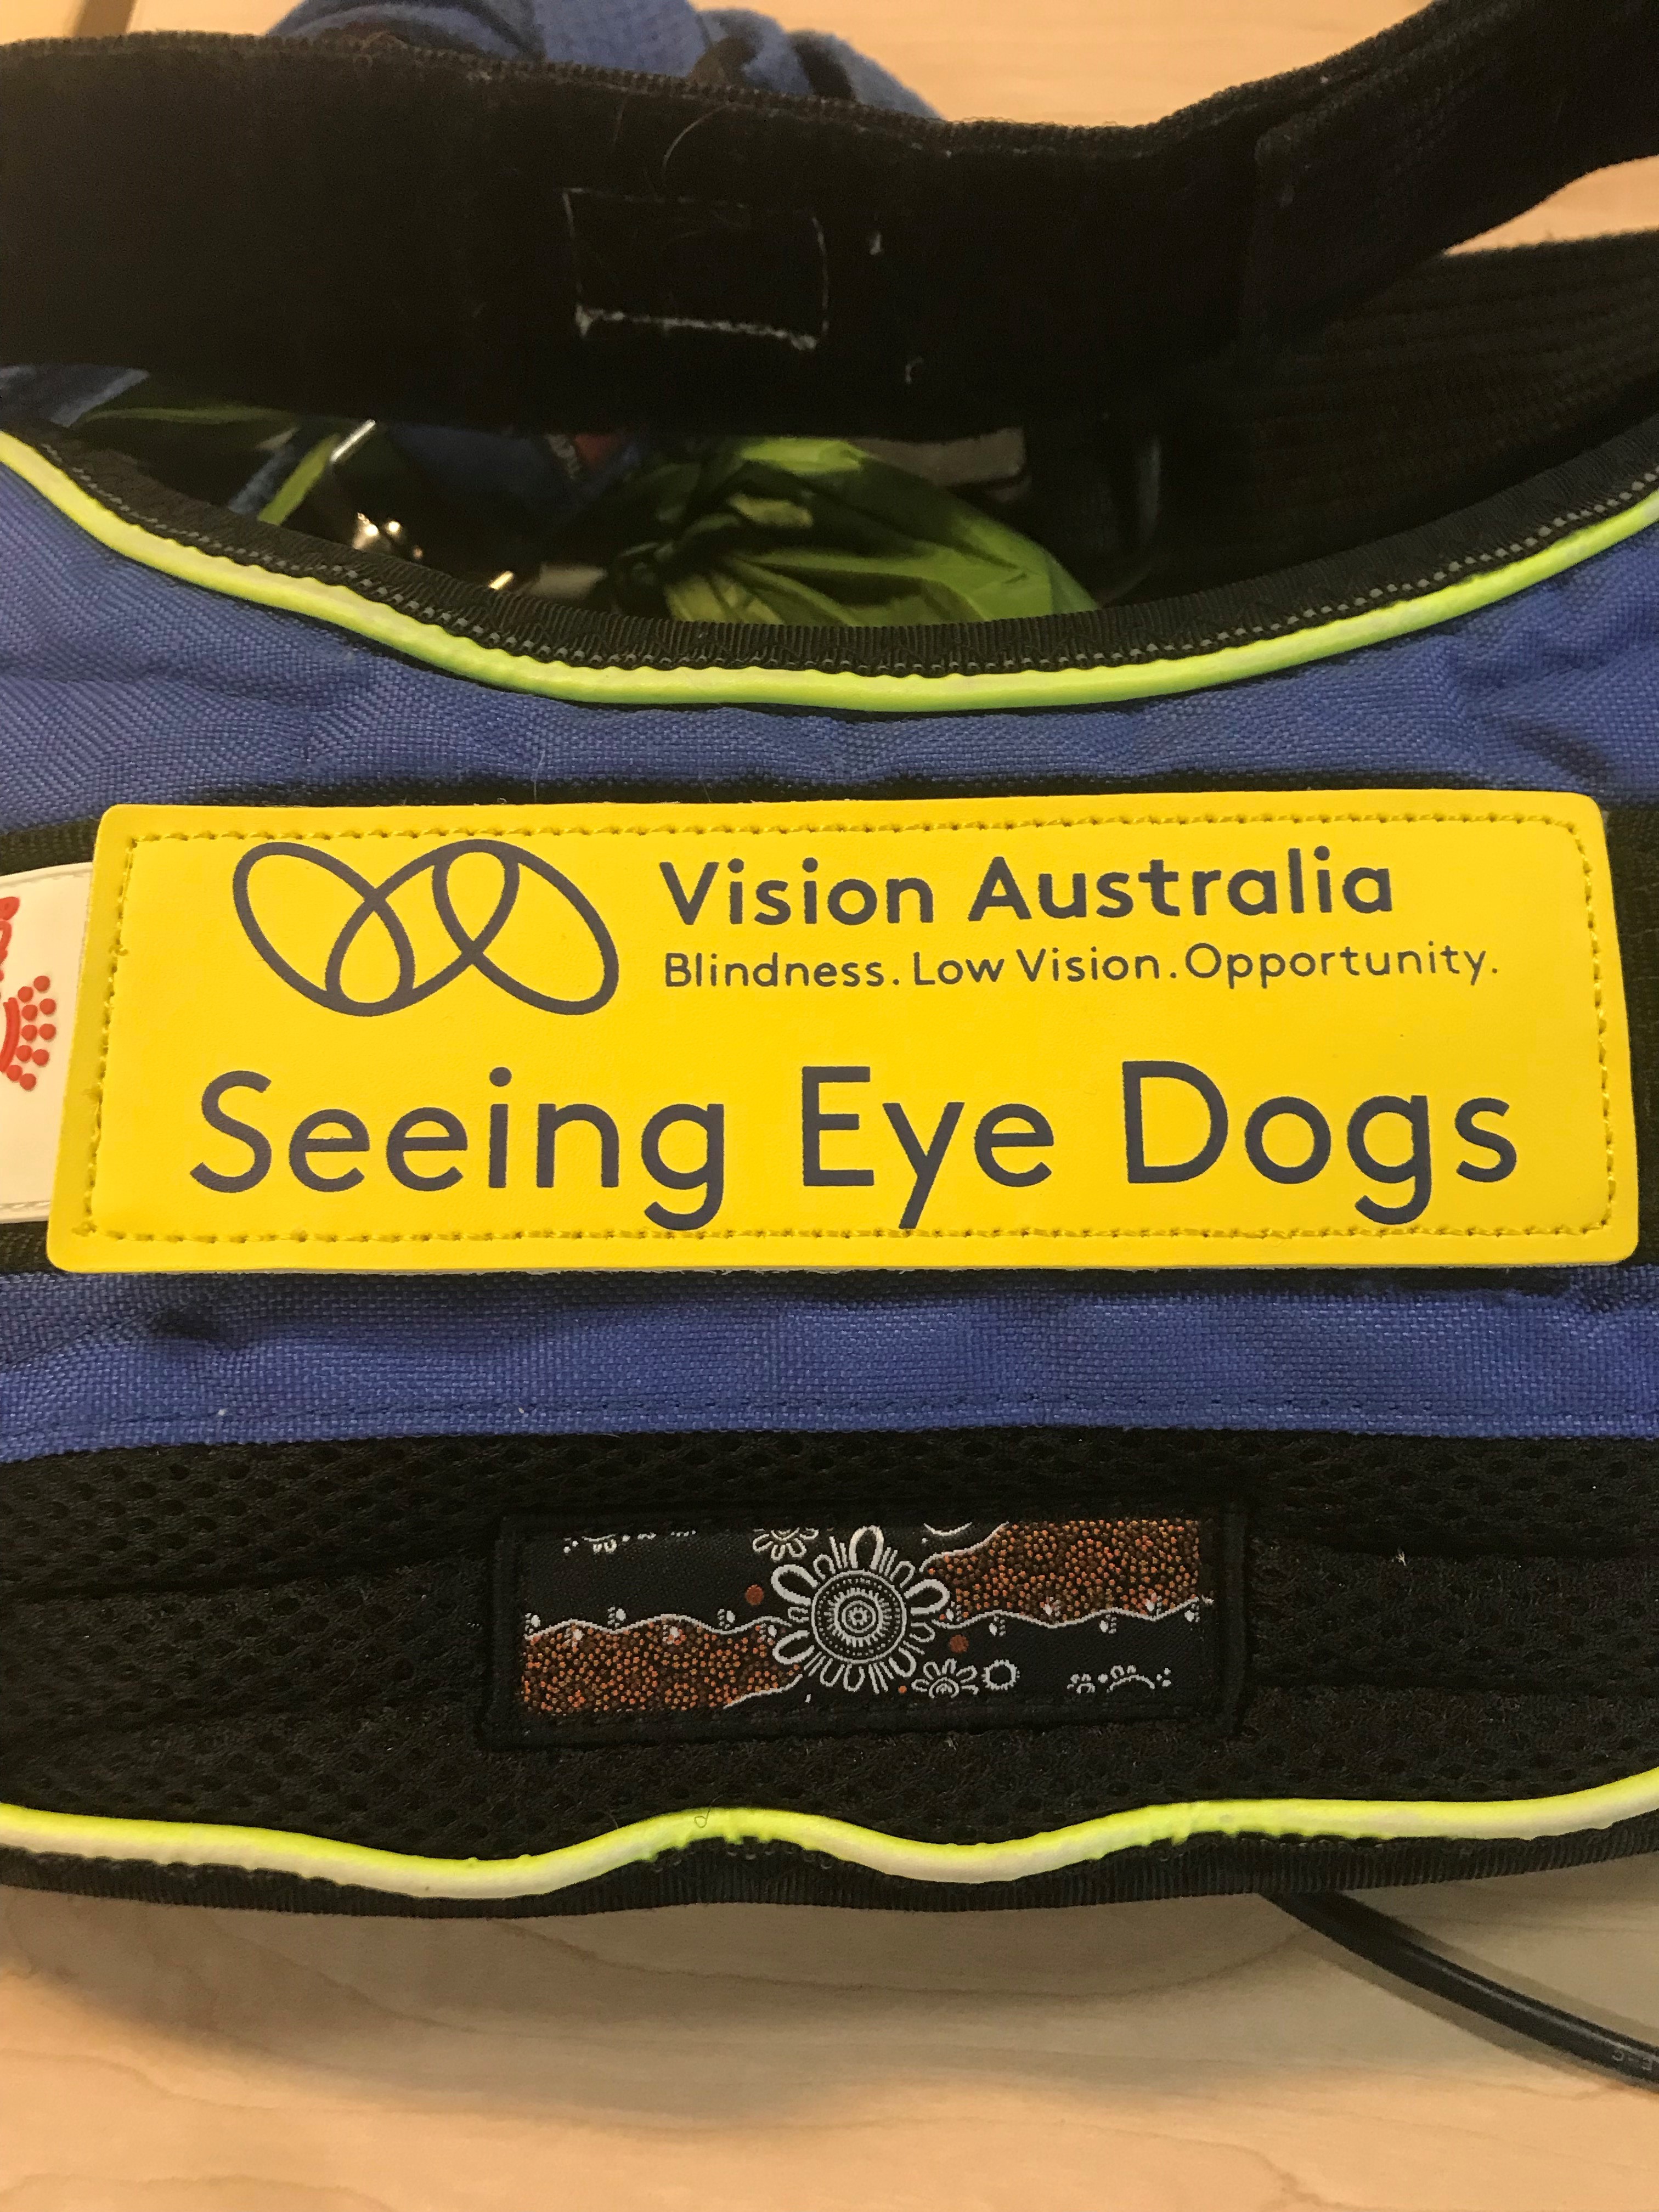 "A Seeing Eye Dogs jacket with the Reconciliation Action Plan artwork attached."